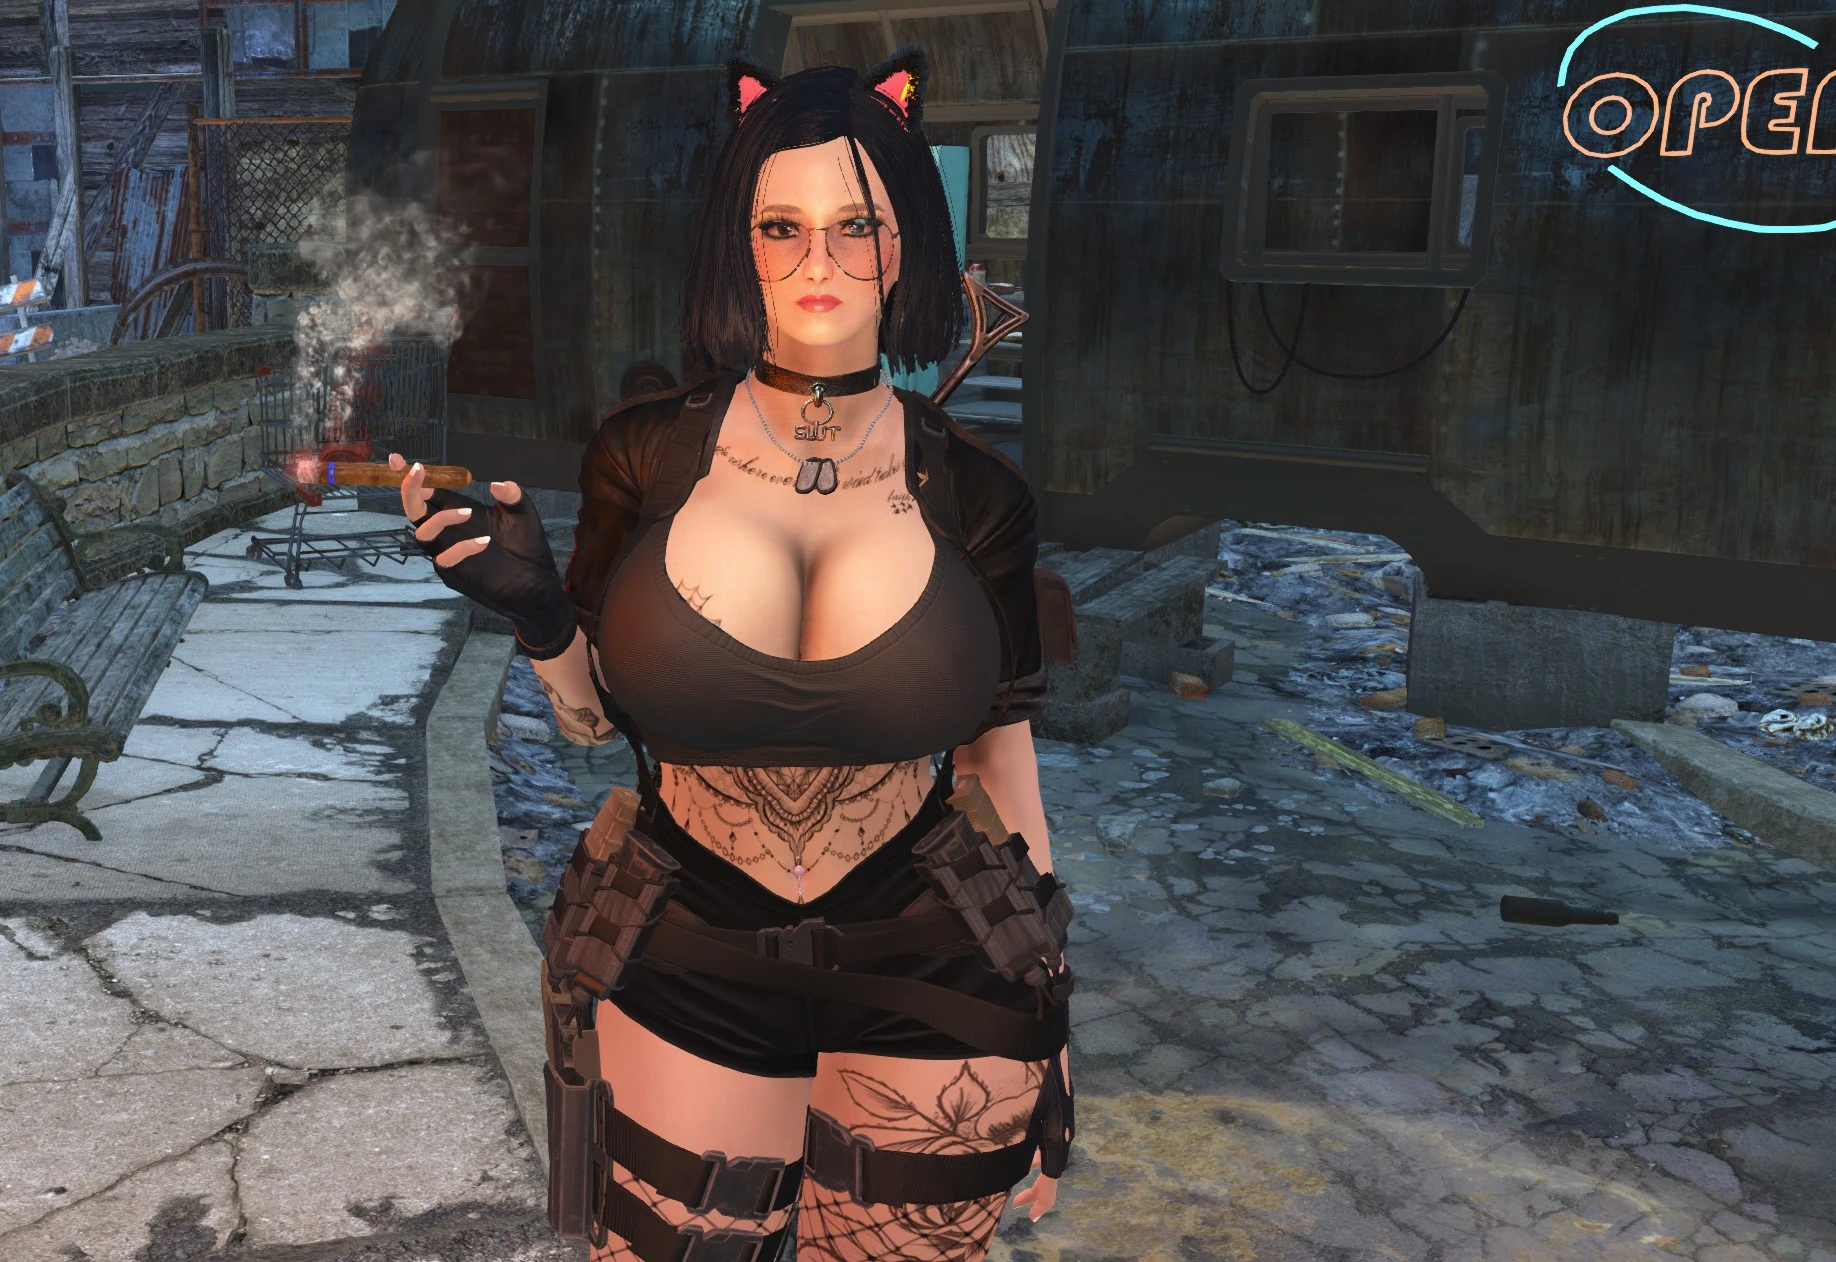 Of course there's a bigger boobs mod for Fallout 4